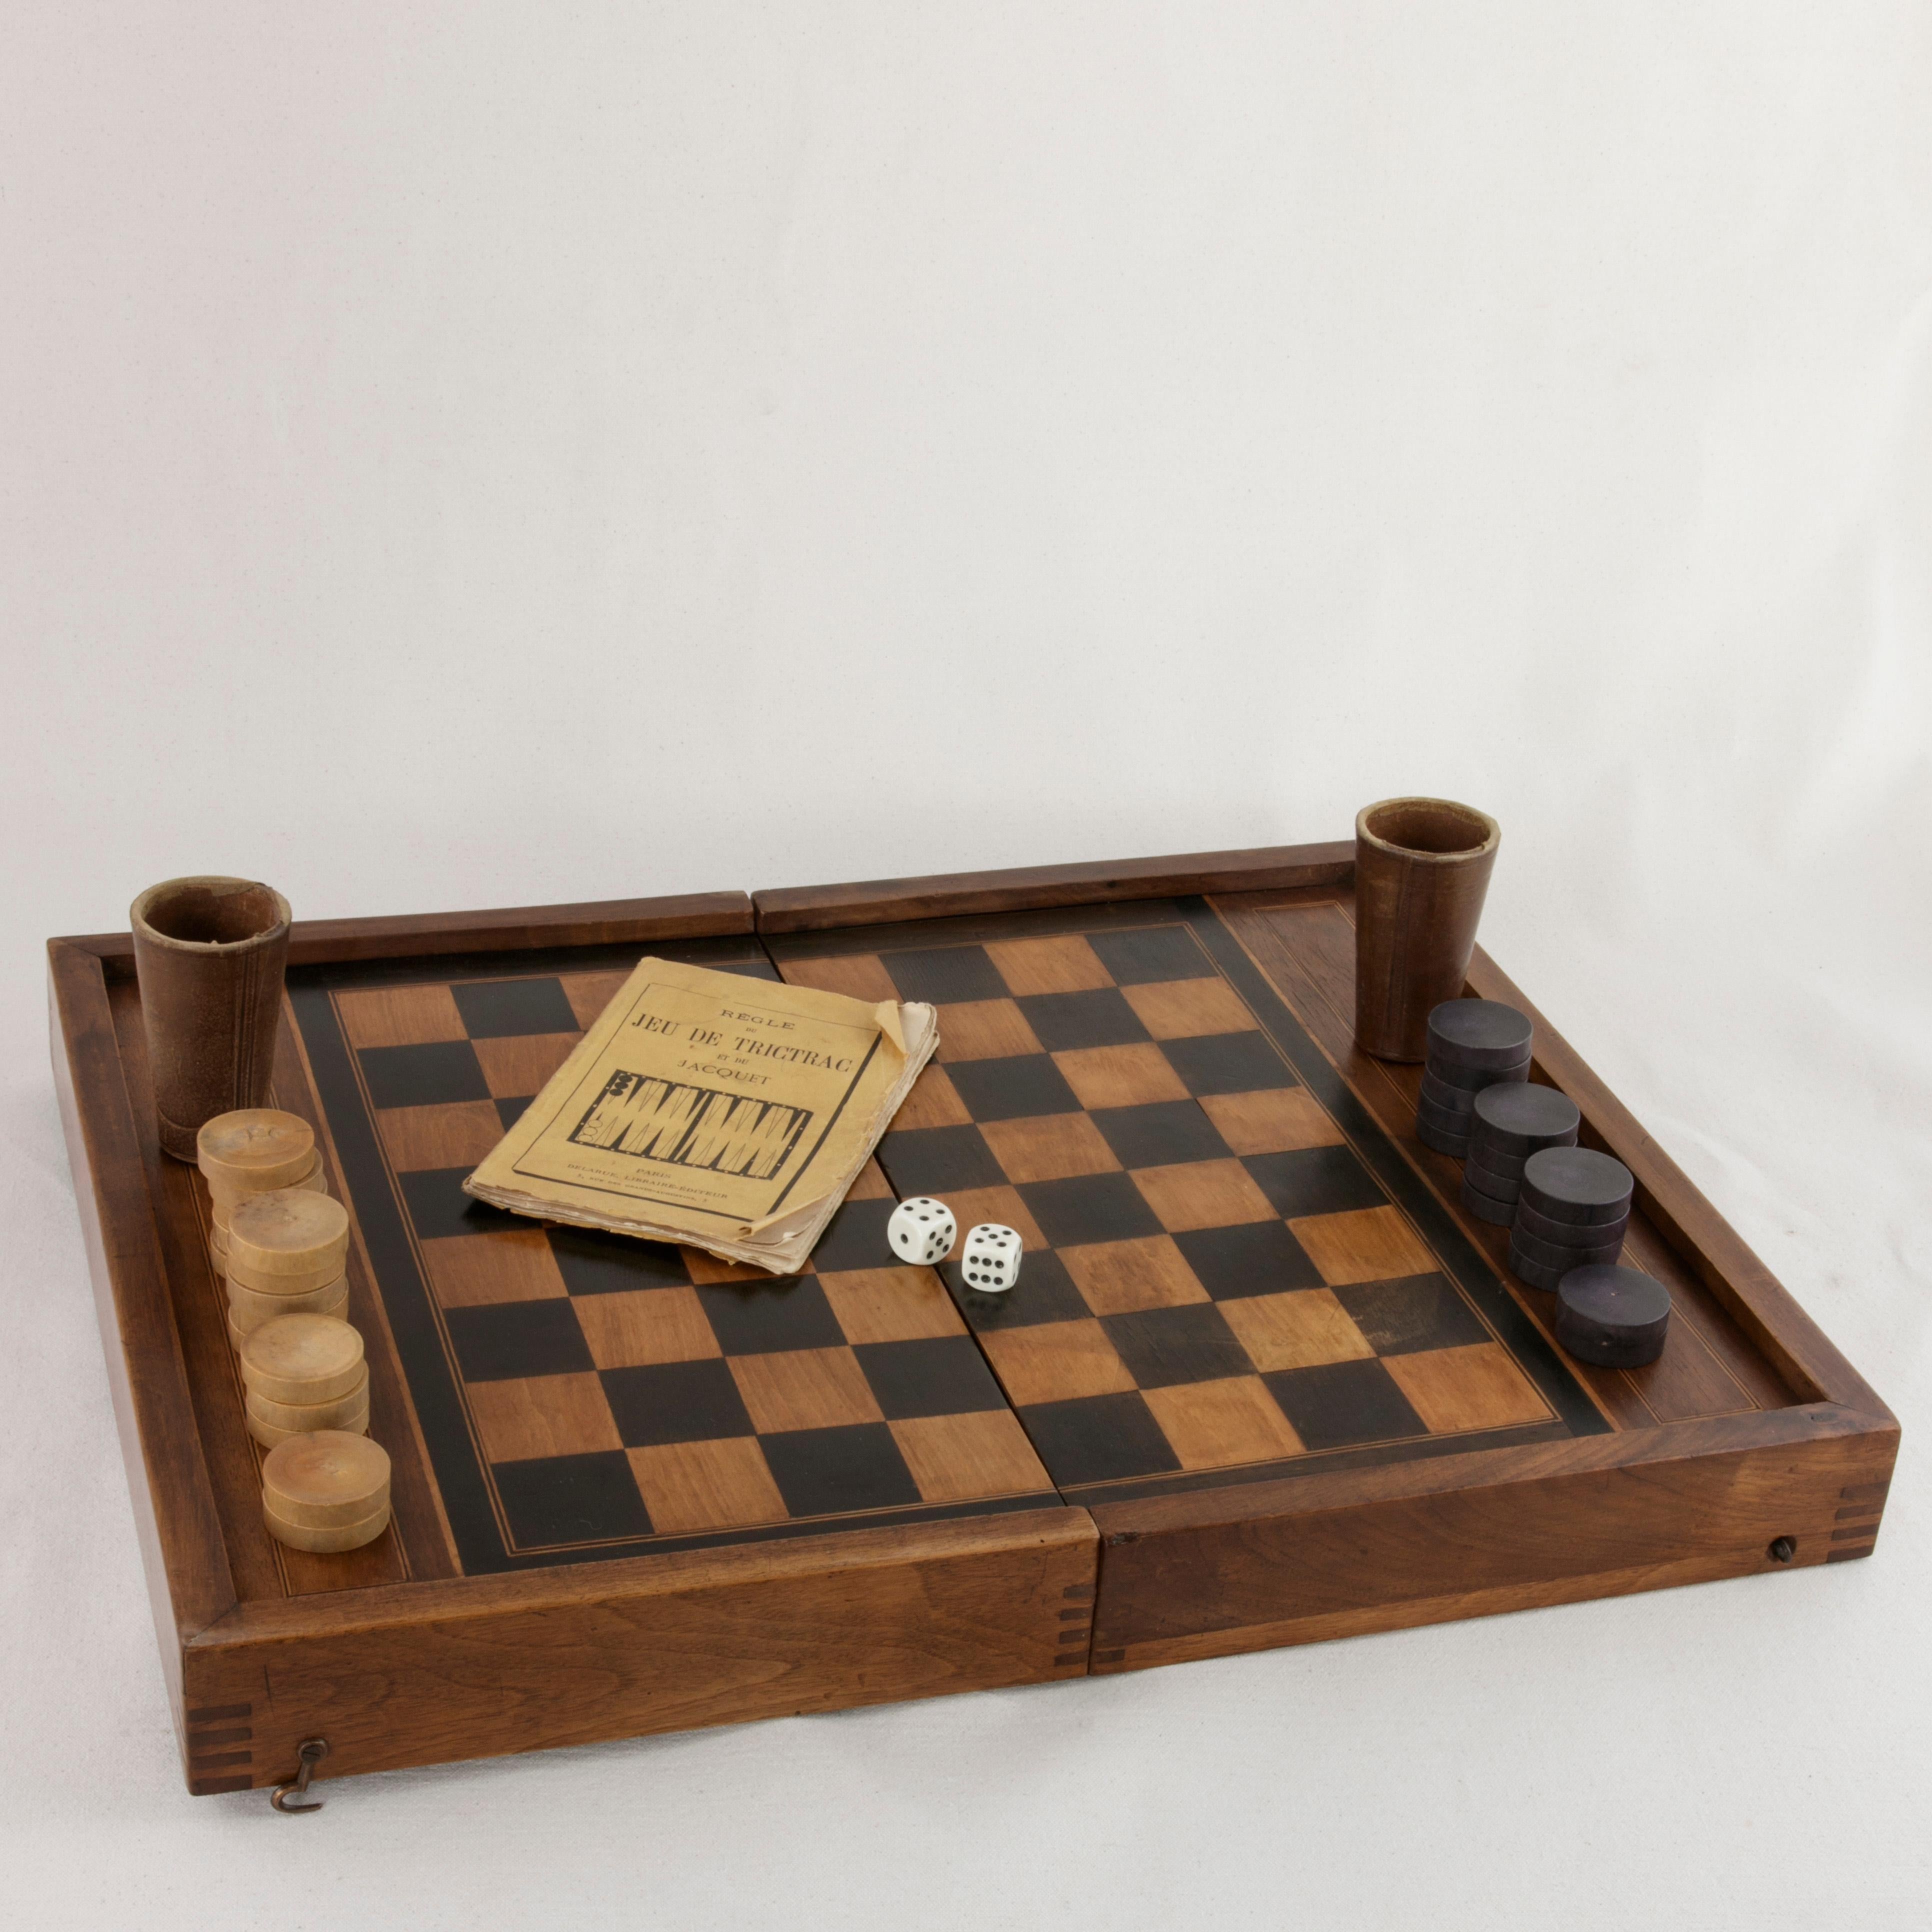 This French walnut marquetry folding game box from the turn of the twentieth century is for both checkers and backgammon. It is finely constructed with dovetailed corners, inset hinges, and a locking brass hook on each side. The checker board side